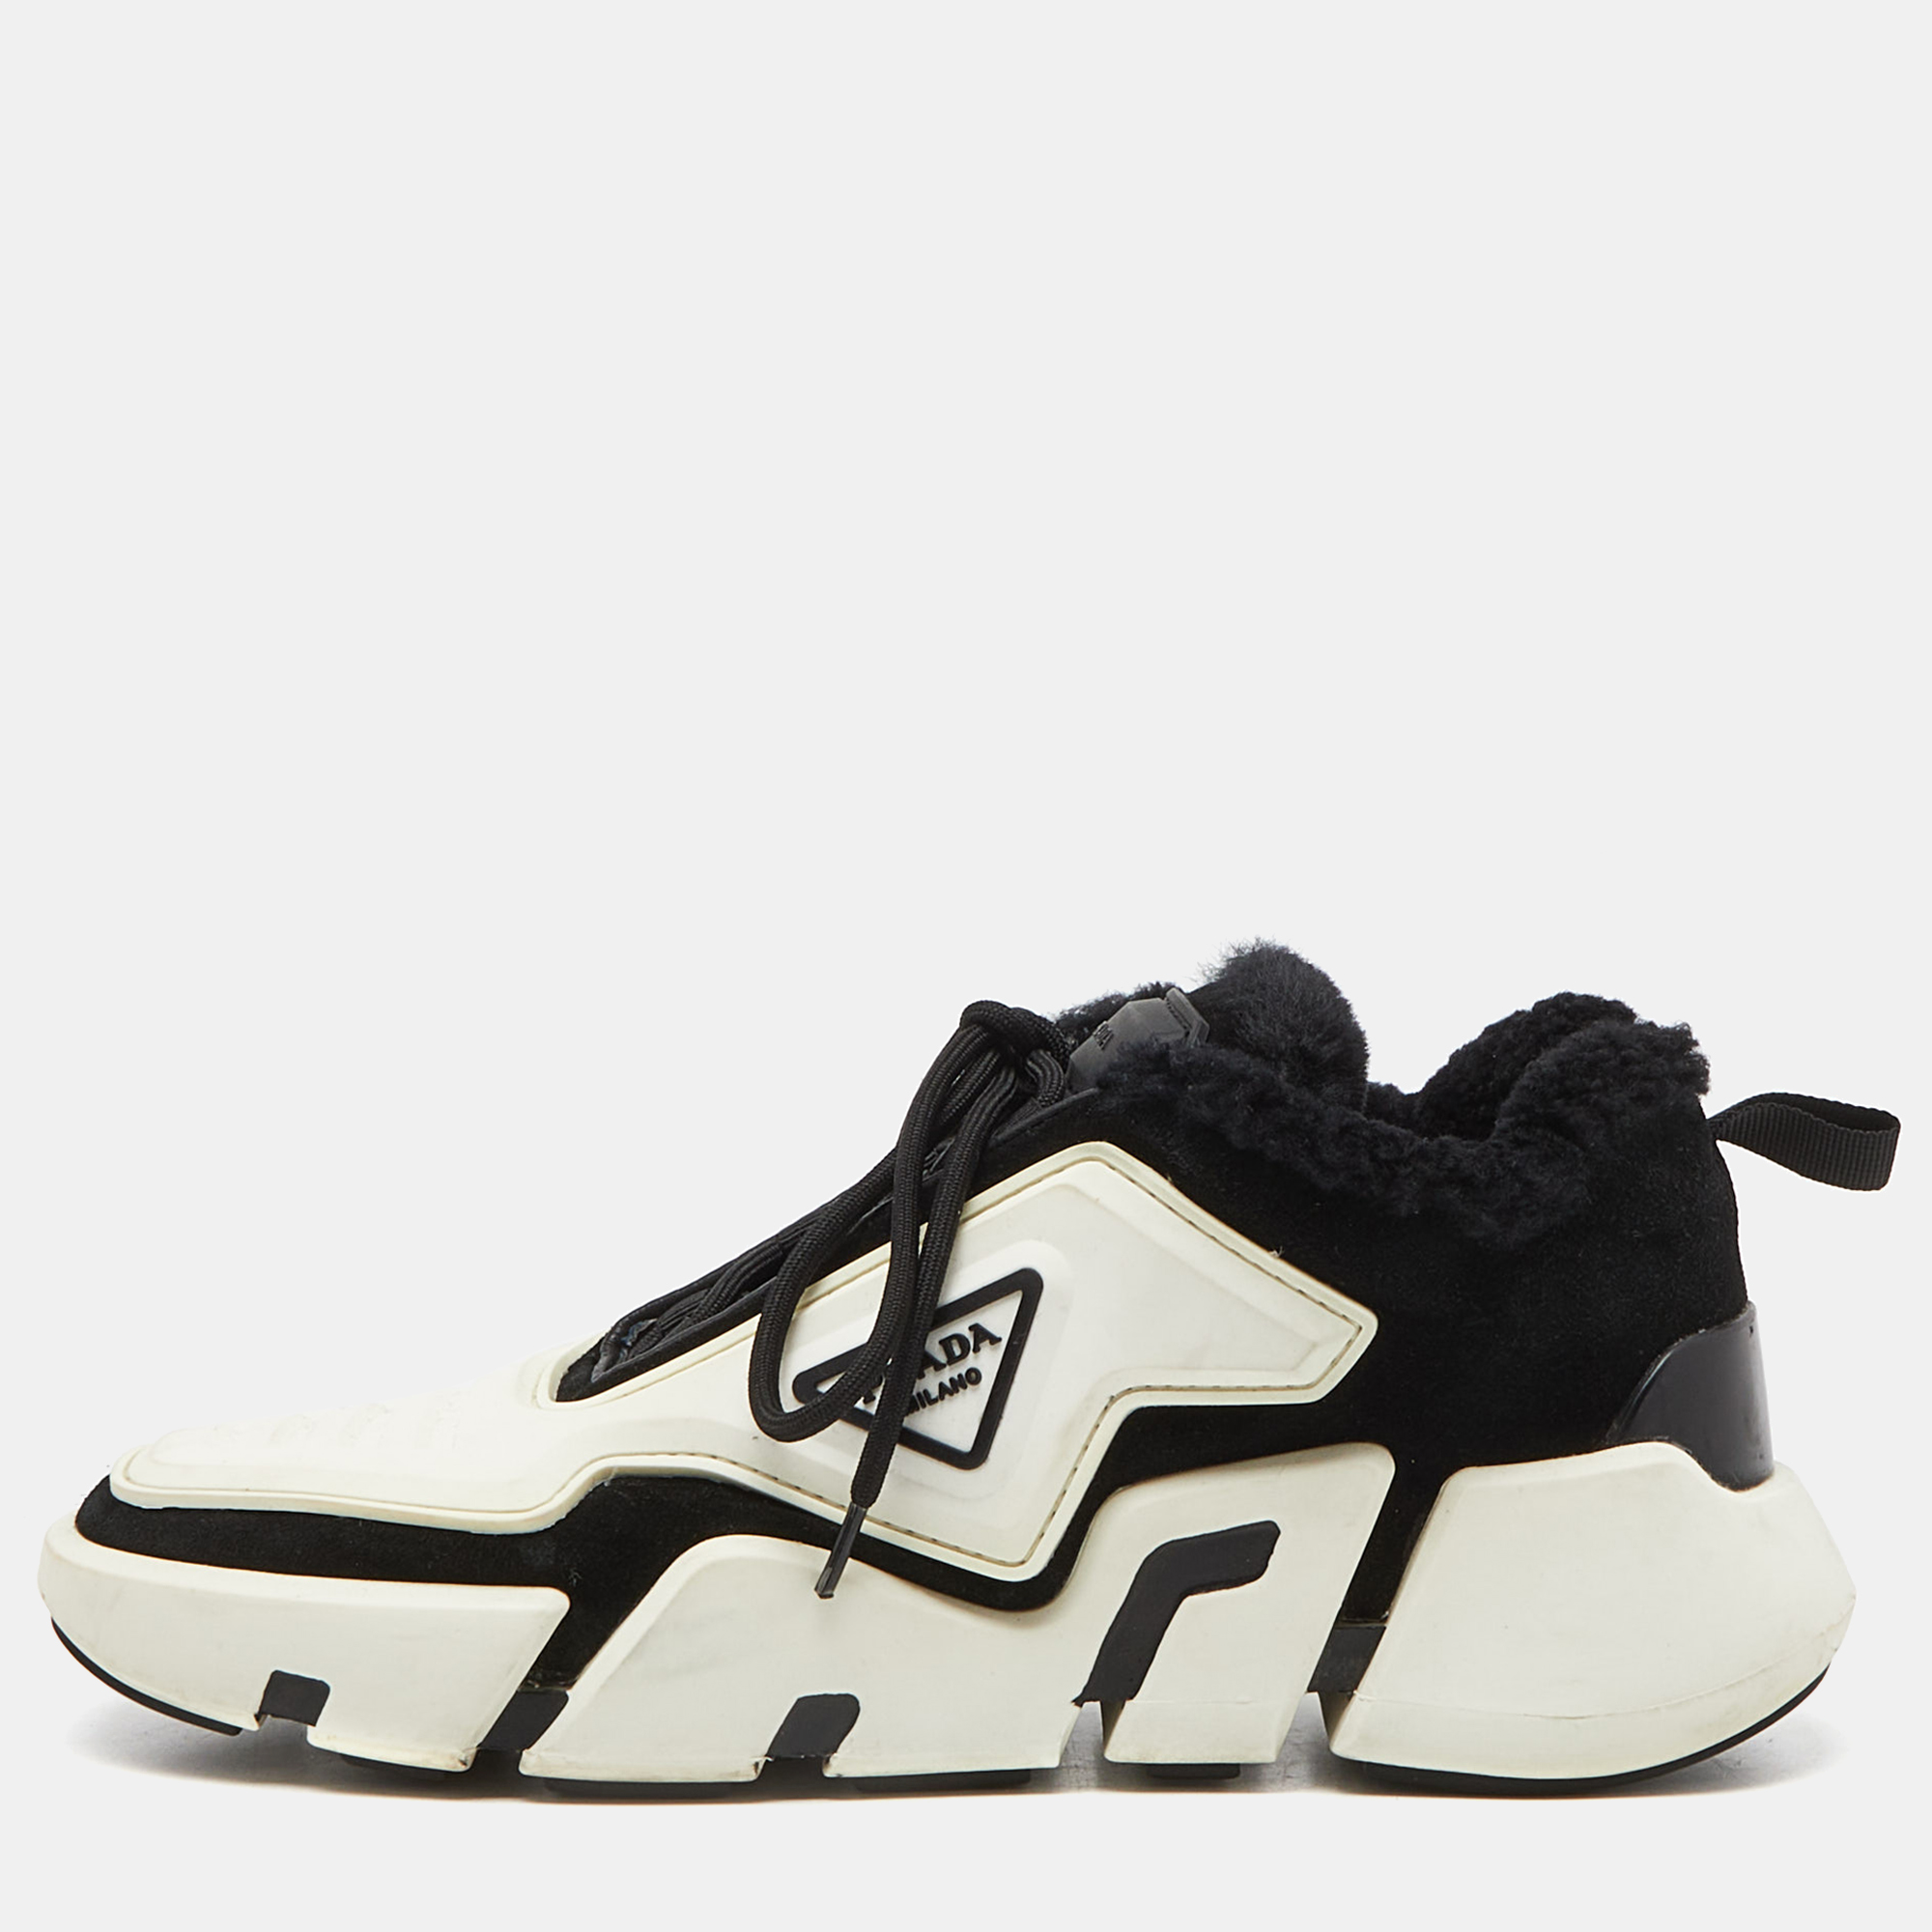 

Prada Black/White Rubber and Suede Low Top Sneakers Size